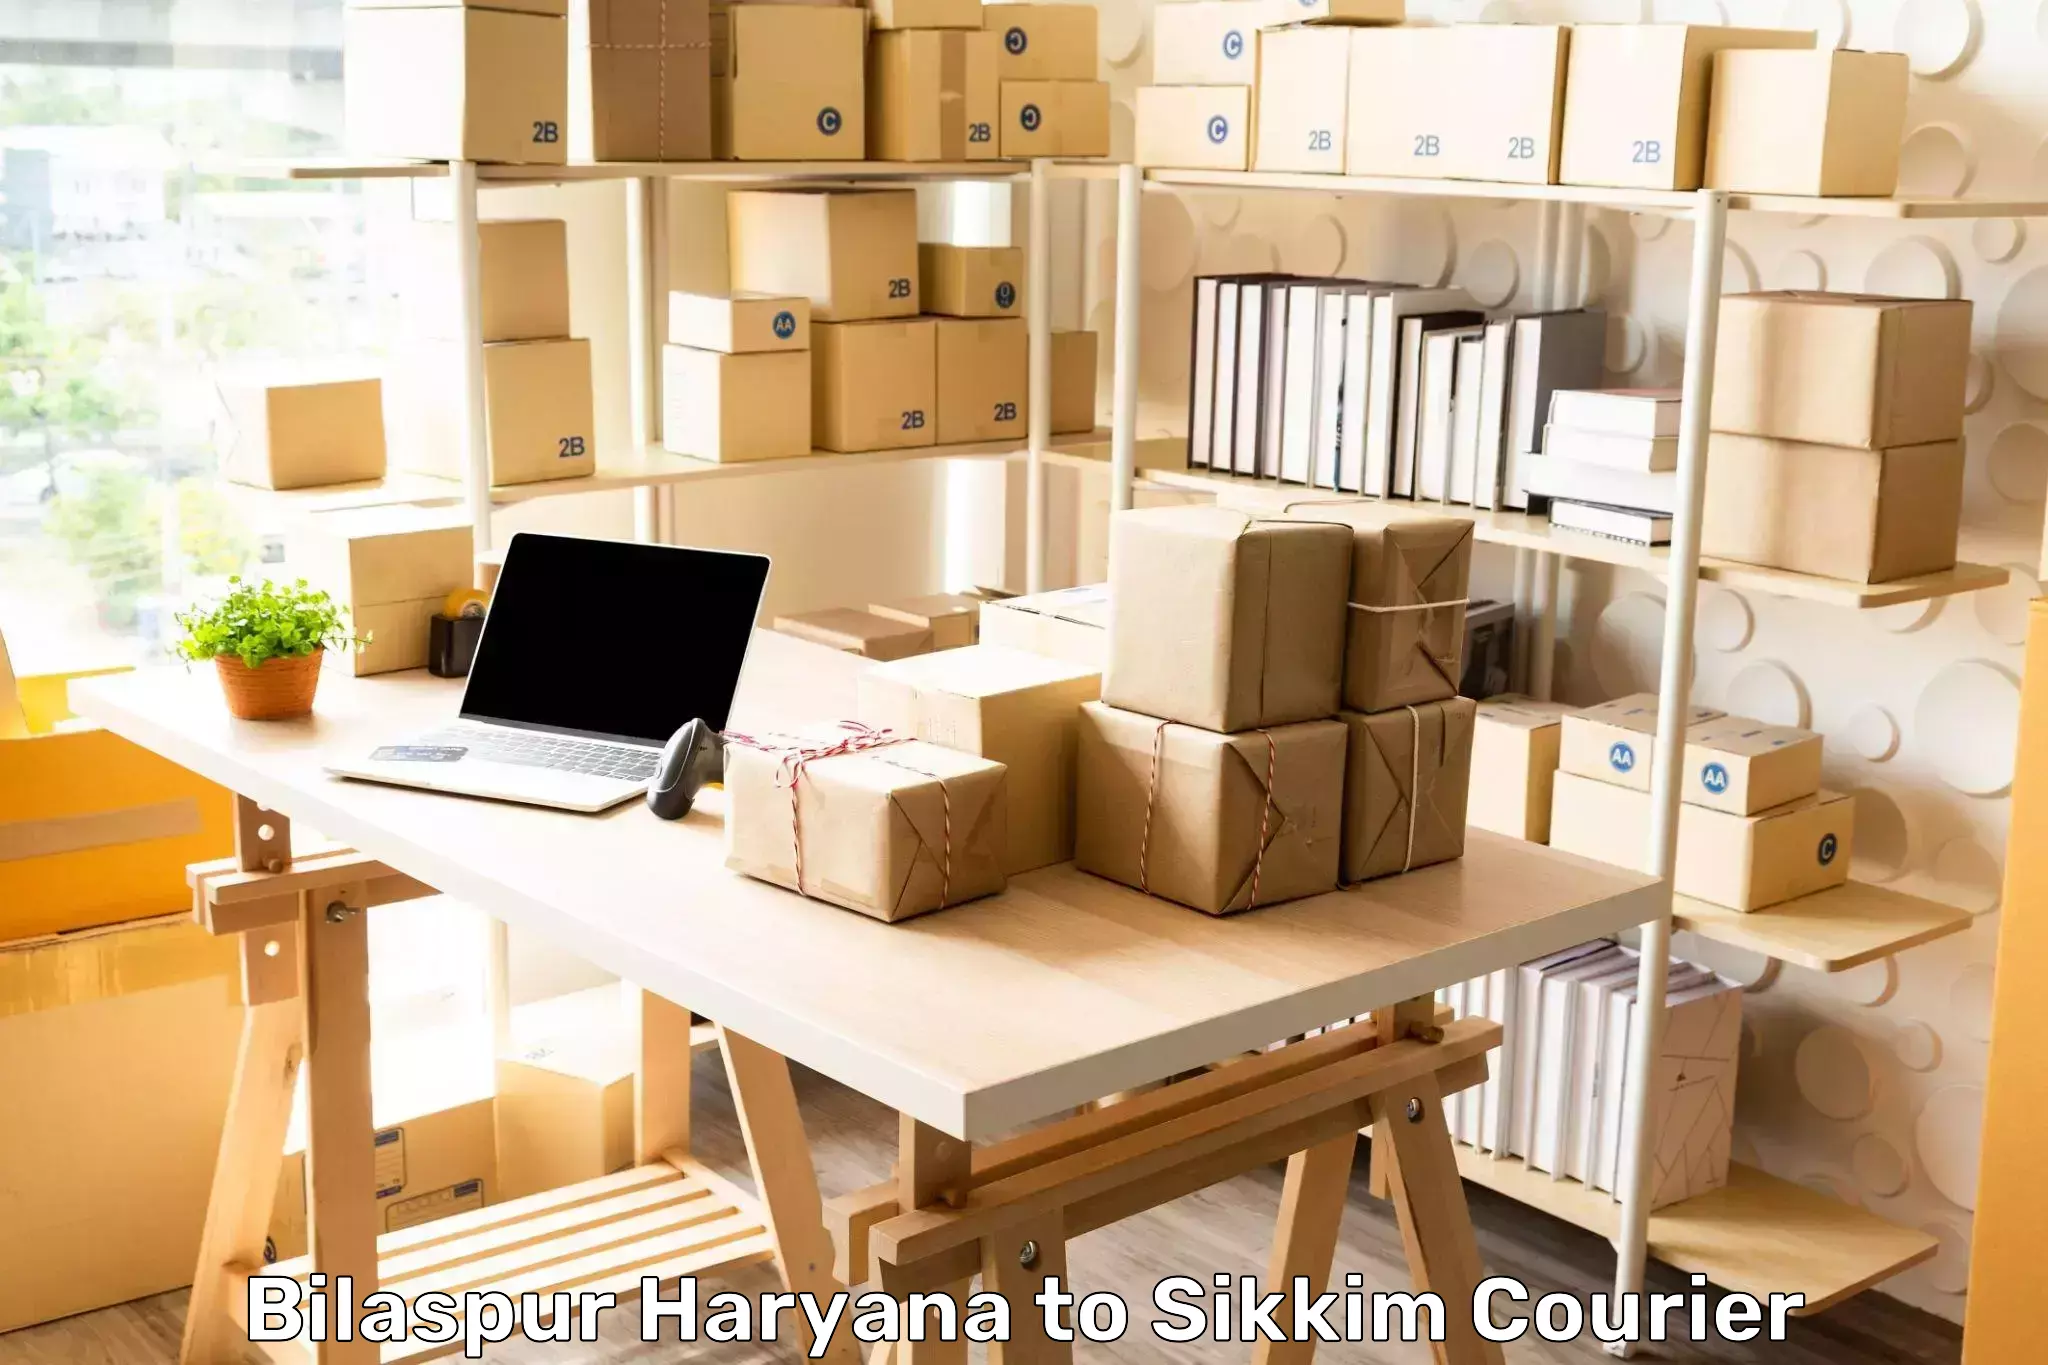 Same-day delivery solutions Bilaspur Haryana to Pelling